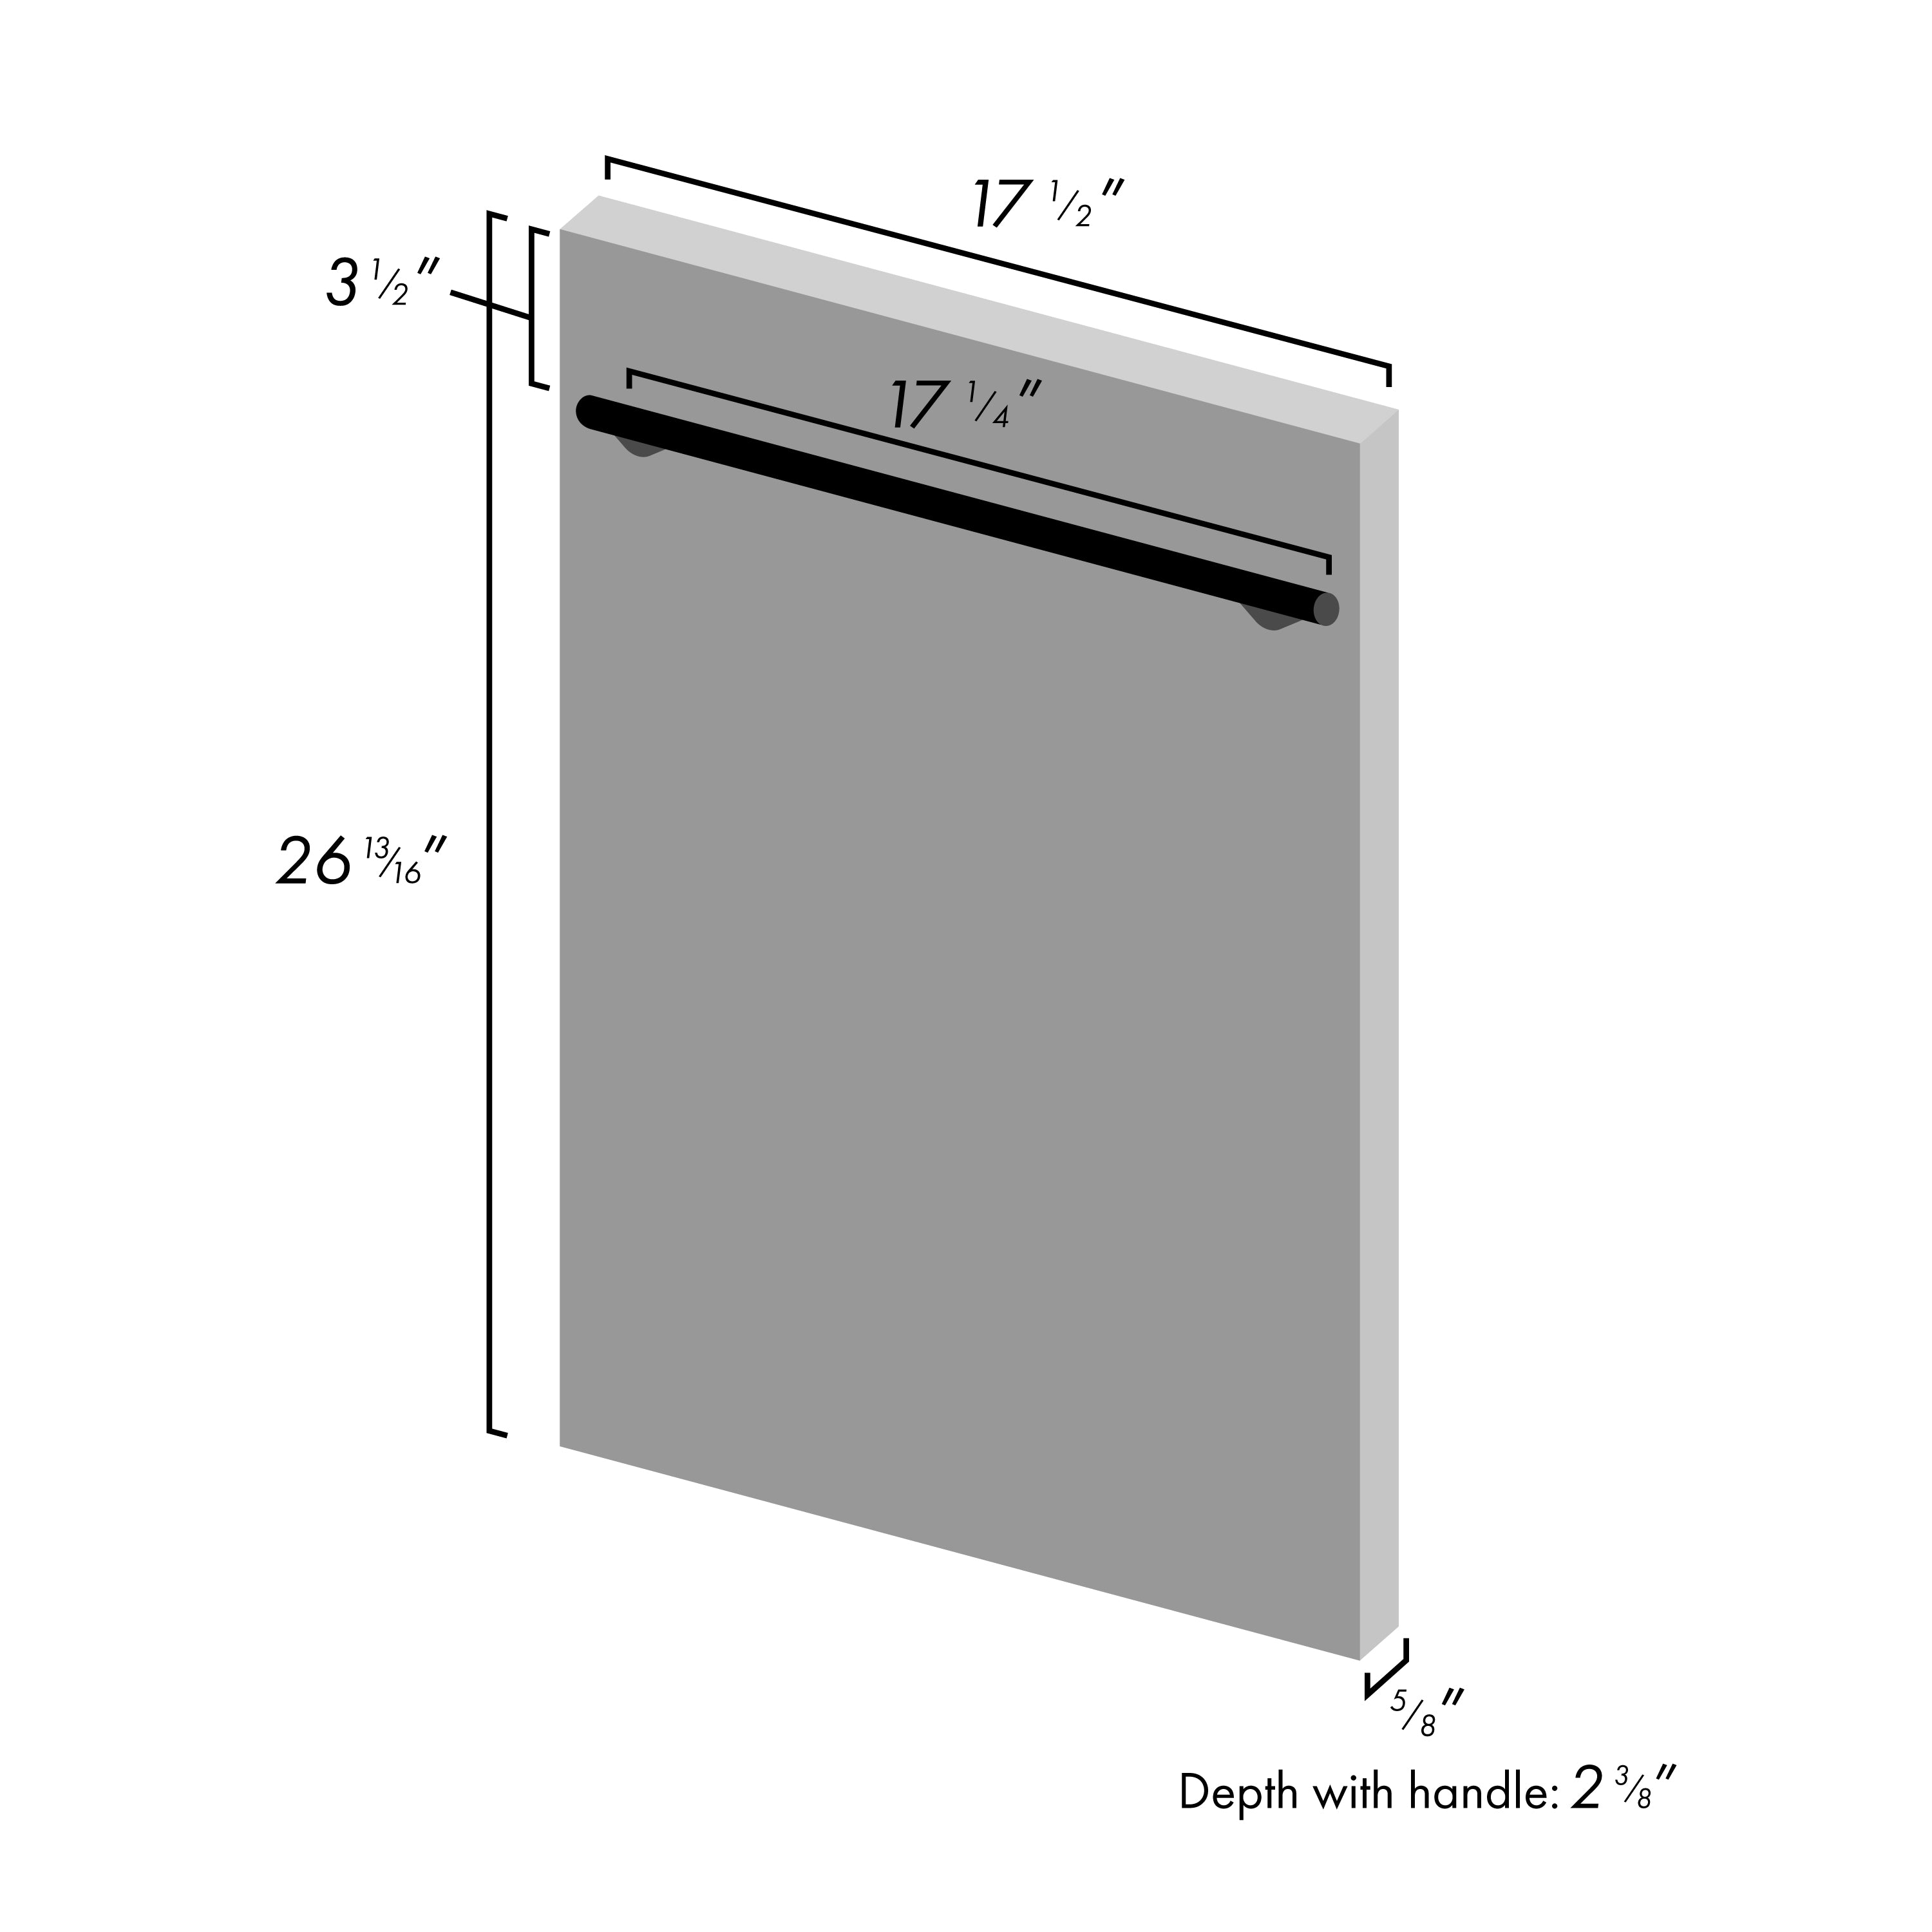 ZLINE 18" Dishwasher Panel in Stainless Steel with Modern Handle (DP-304-18)